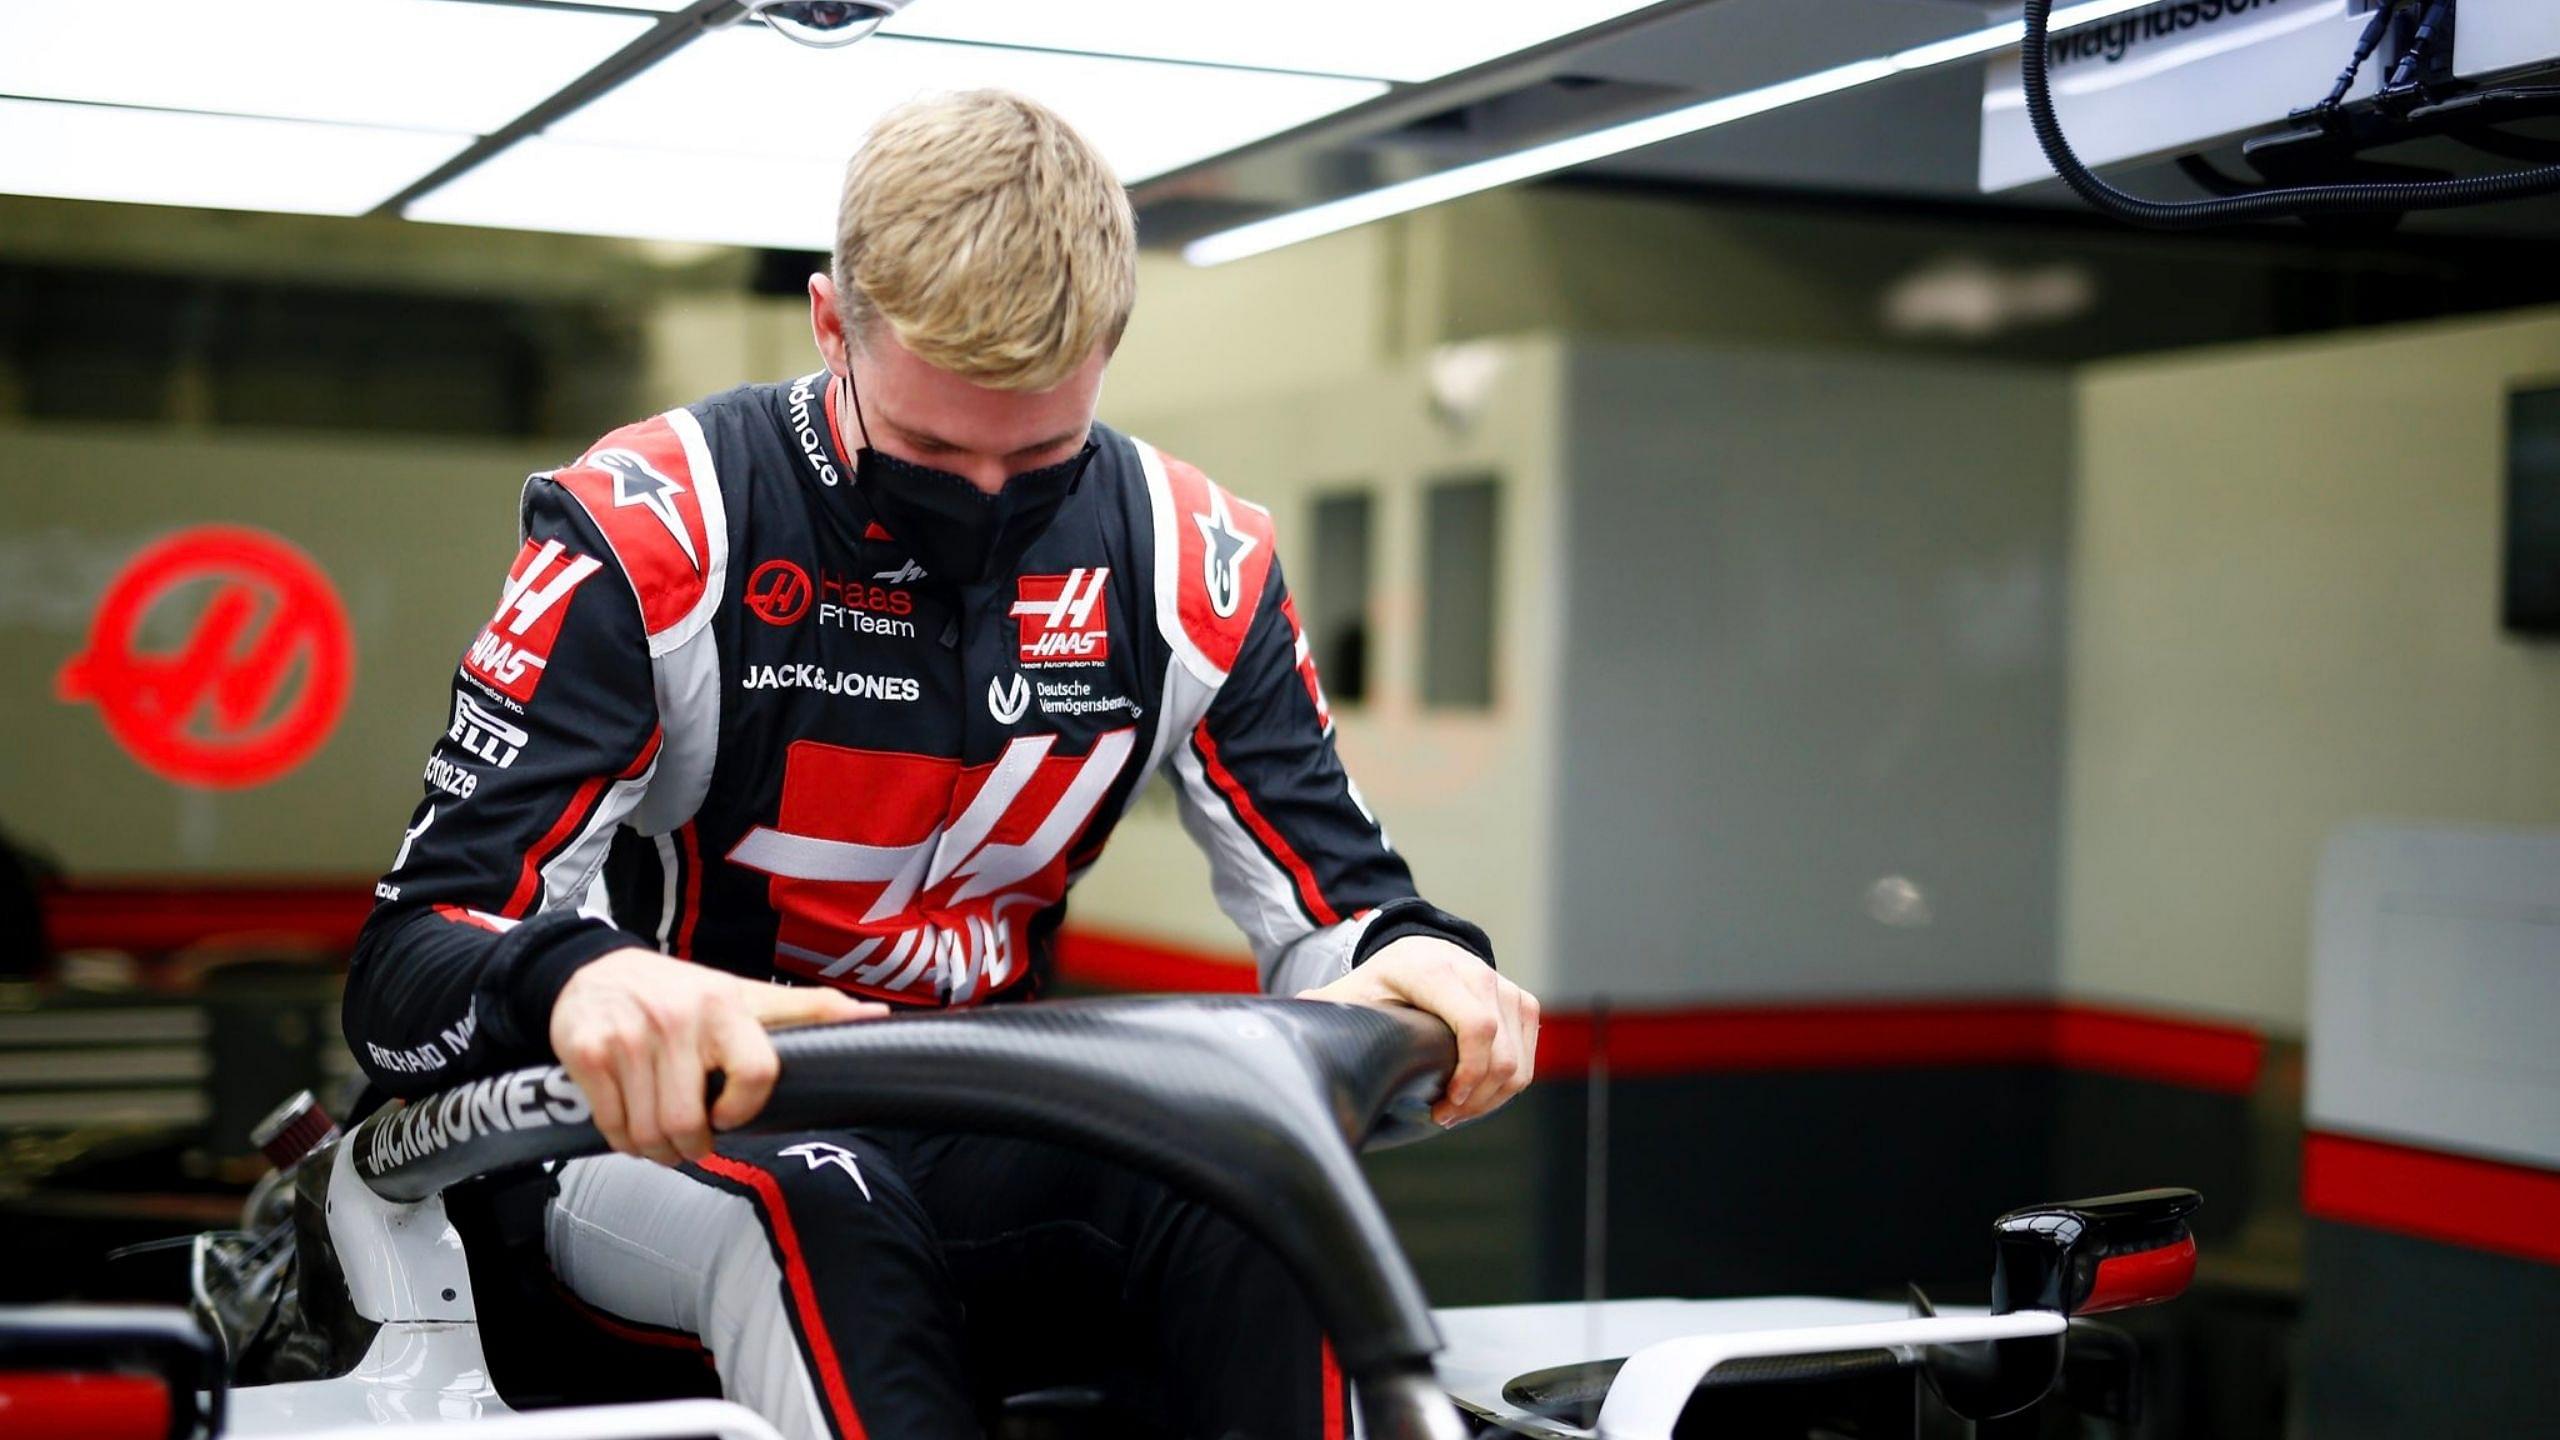 “I am not scared at all" - Mick Schumacher eager to make Formula 1 debut with Haas